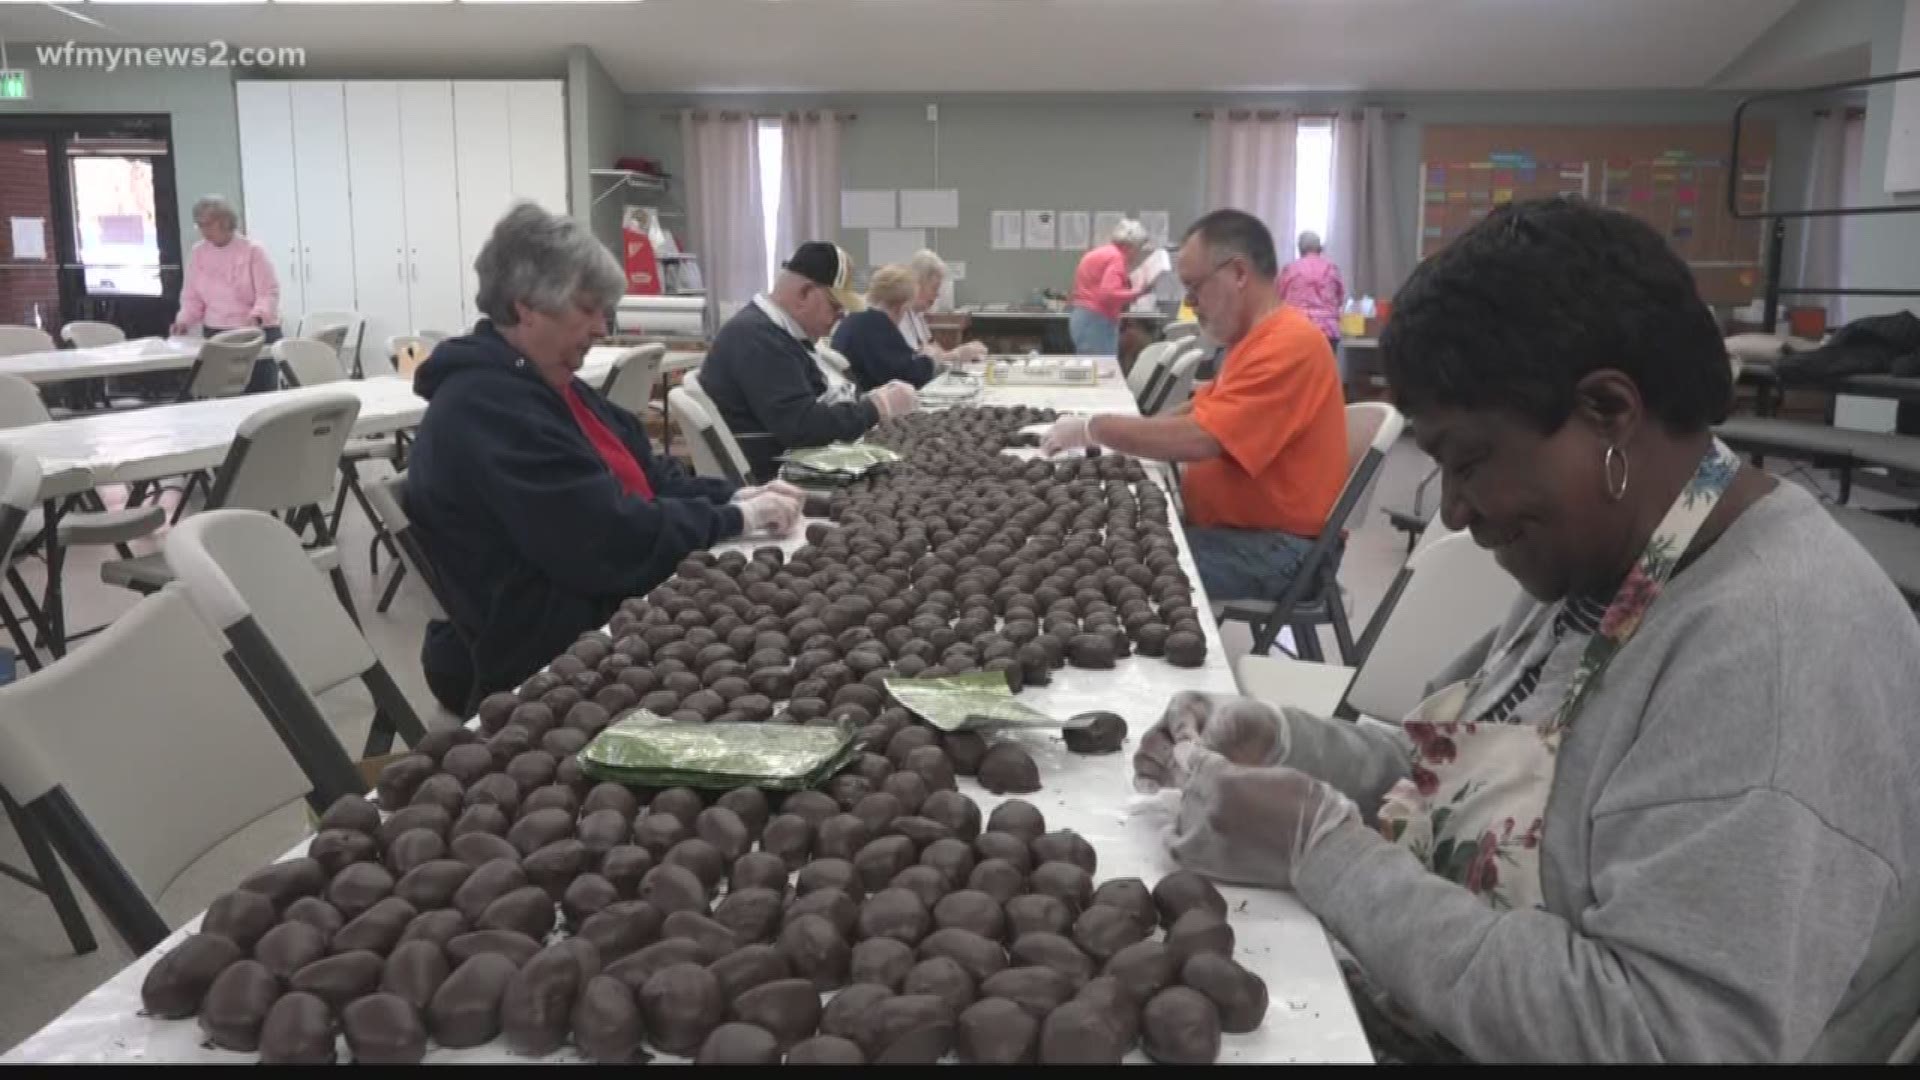 This is the 29th year for First Presbyterian Church’s peanut butter egg fundraiser.